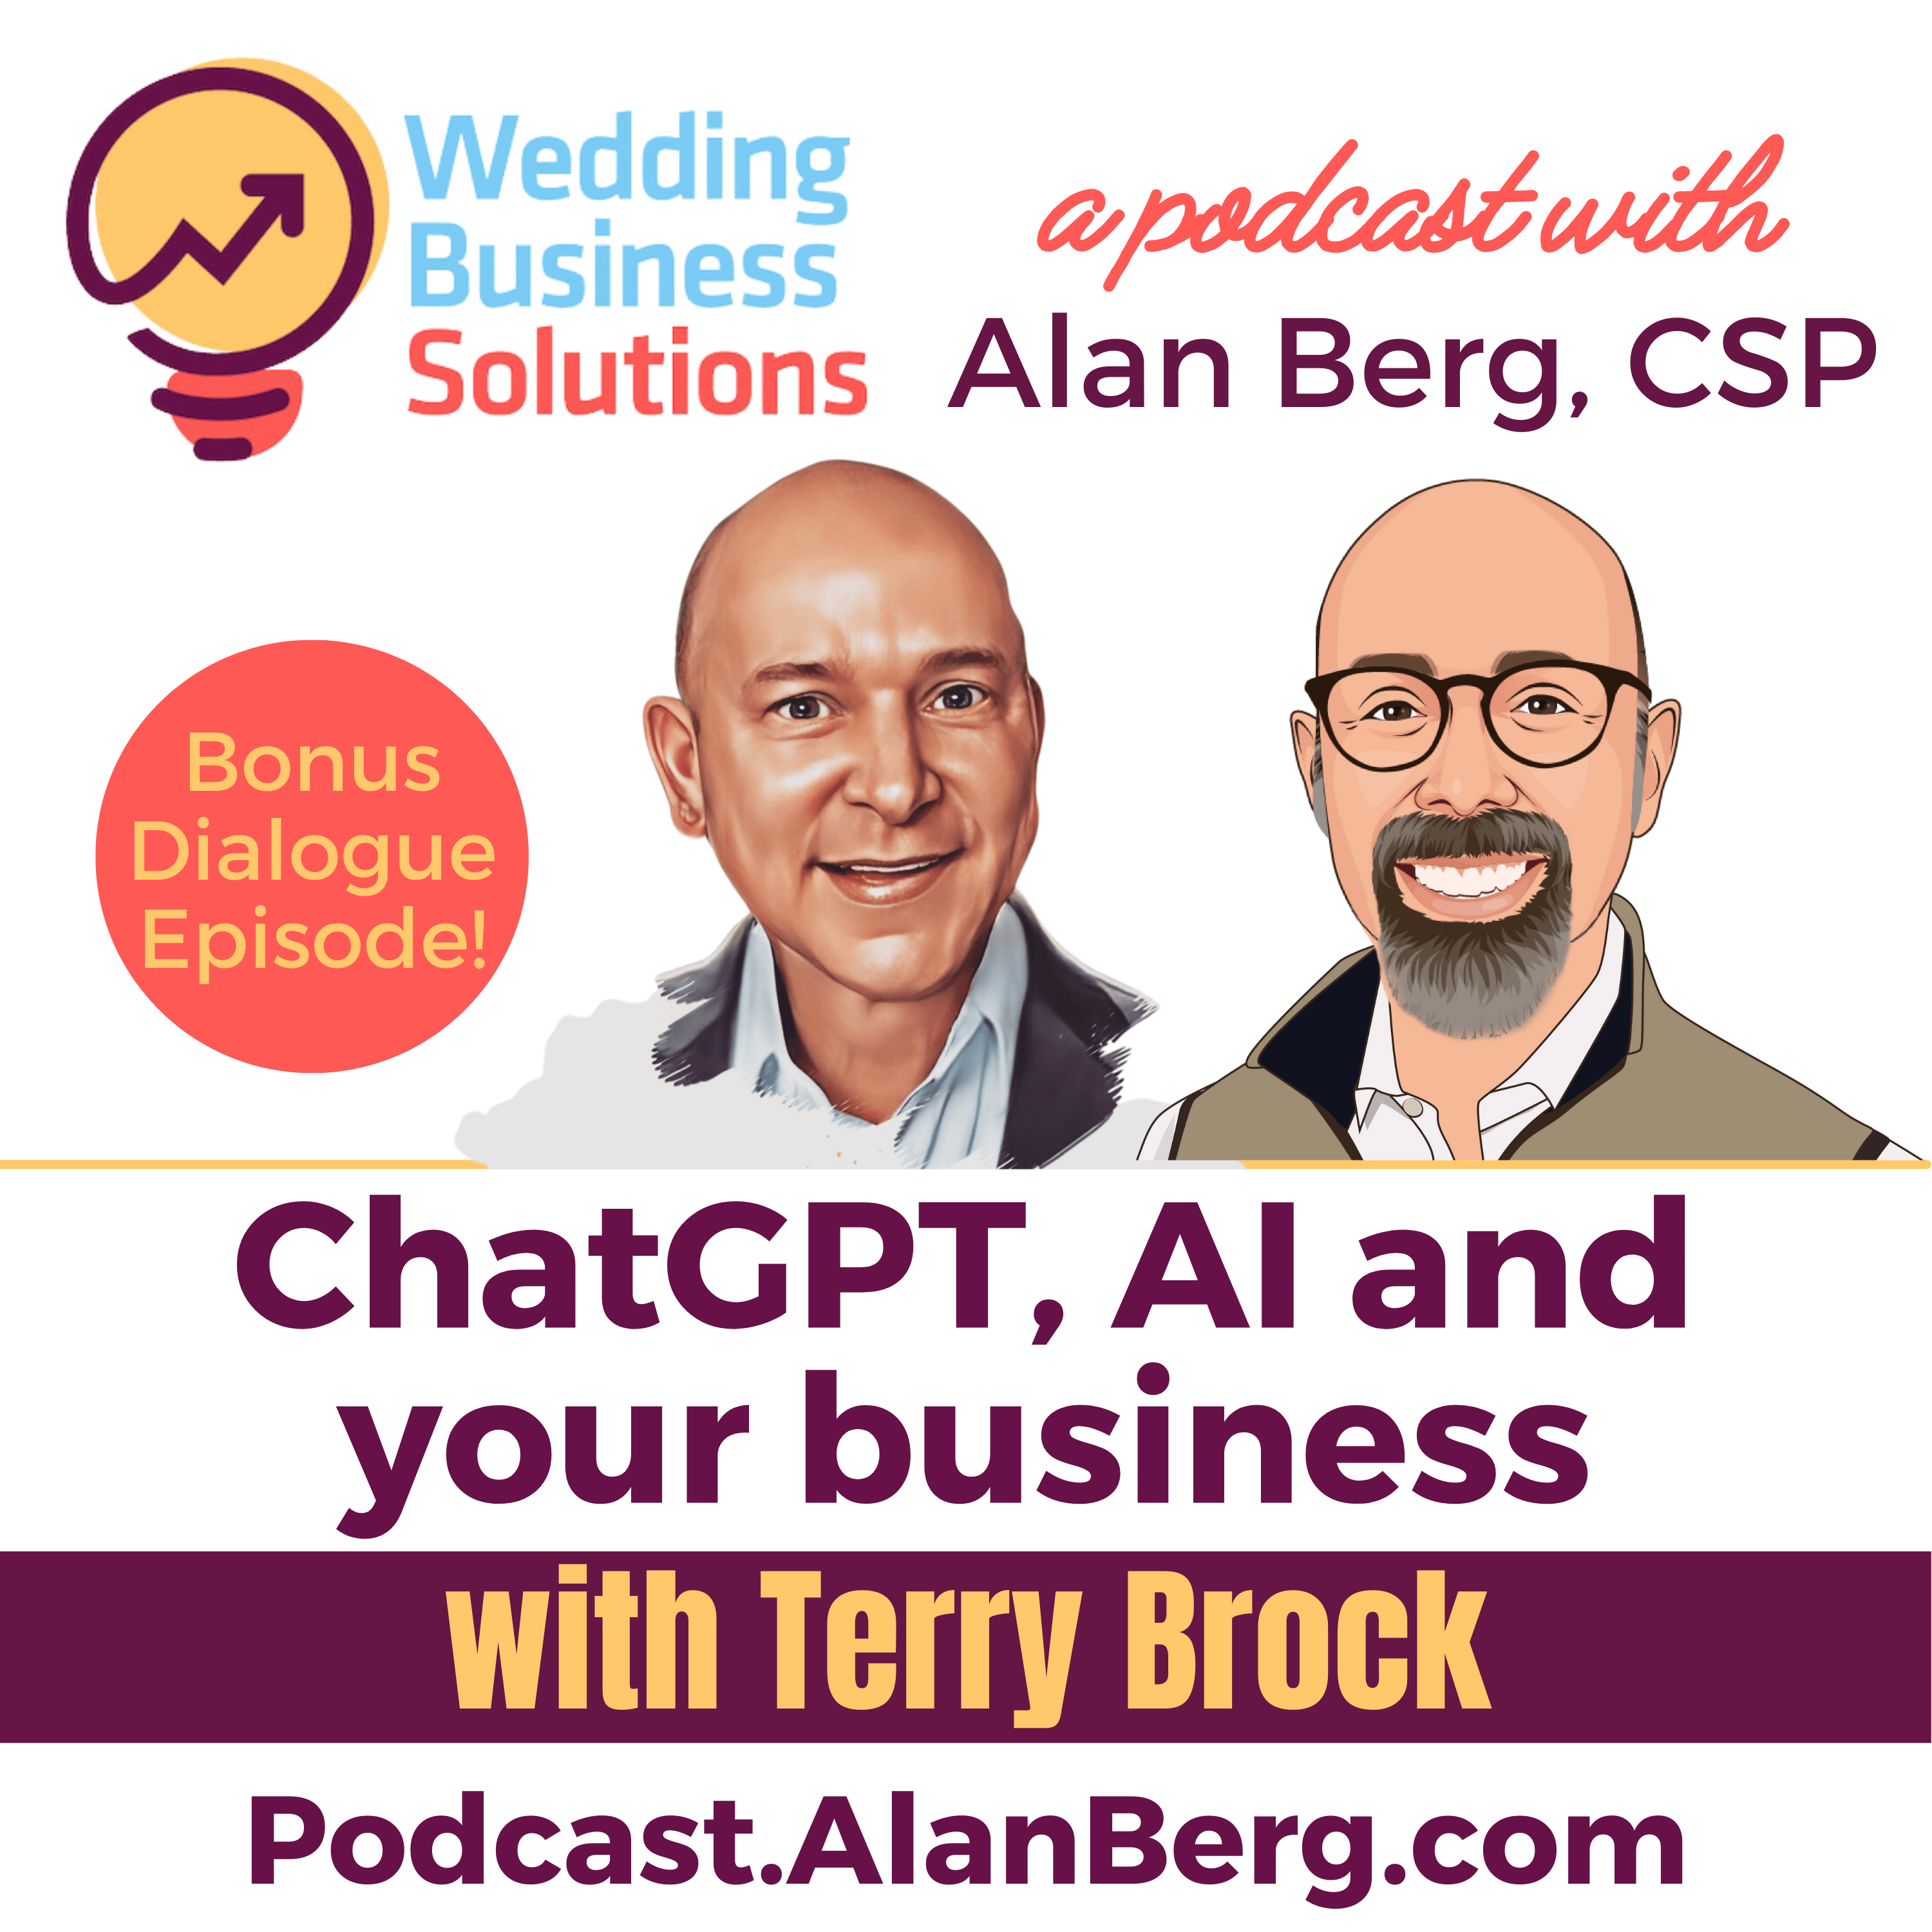 Terry Brock, ChatGPT, AI and your business - Alan Berg CSP, Wedding Business Solutions